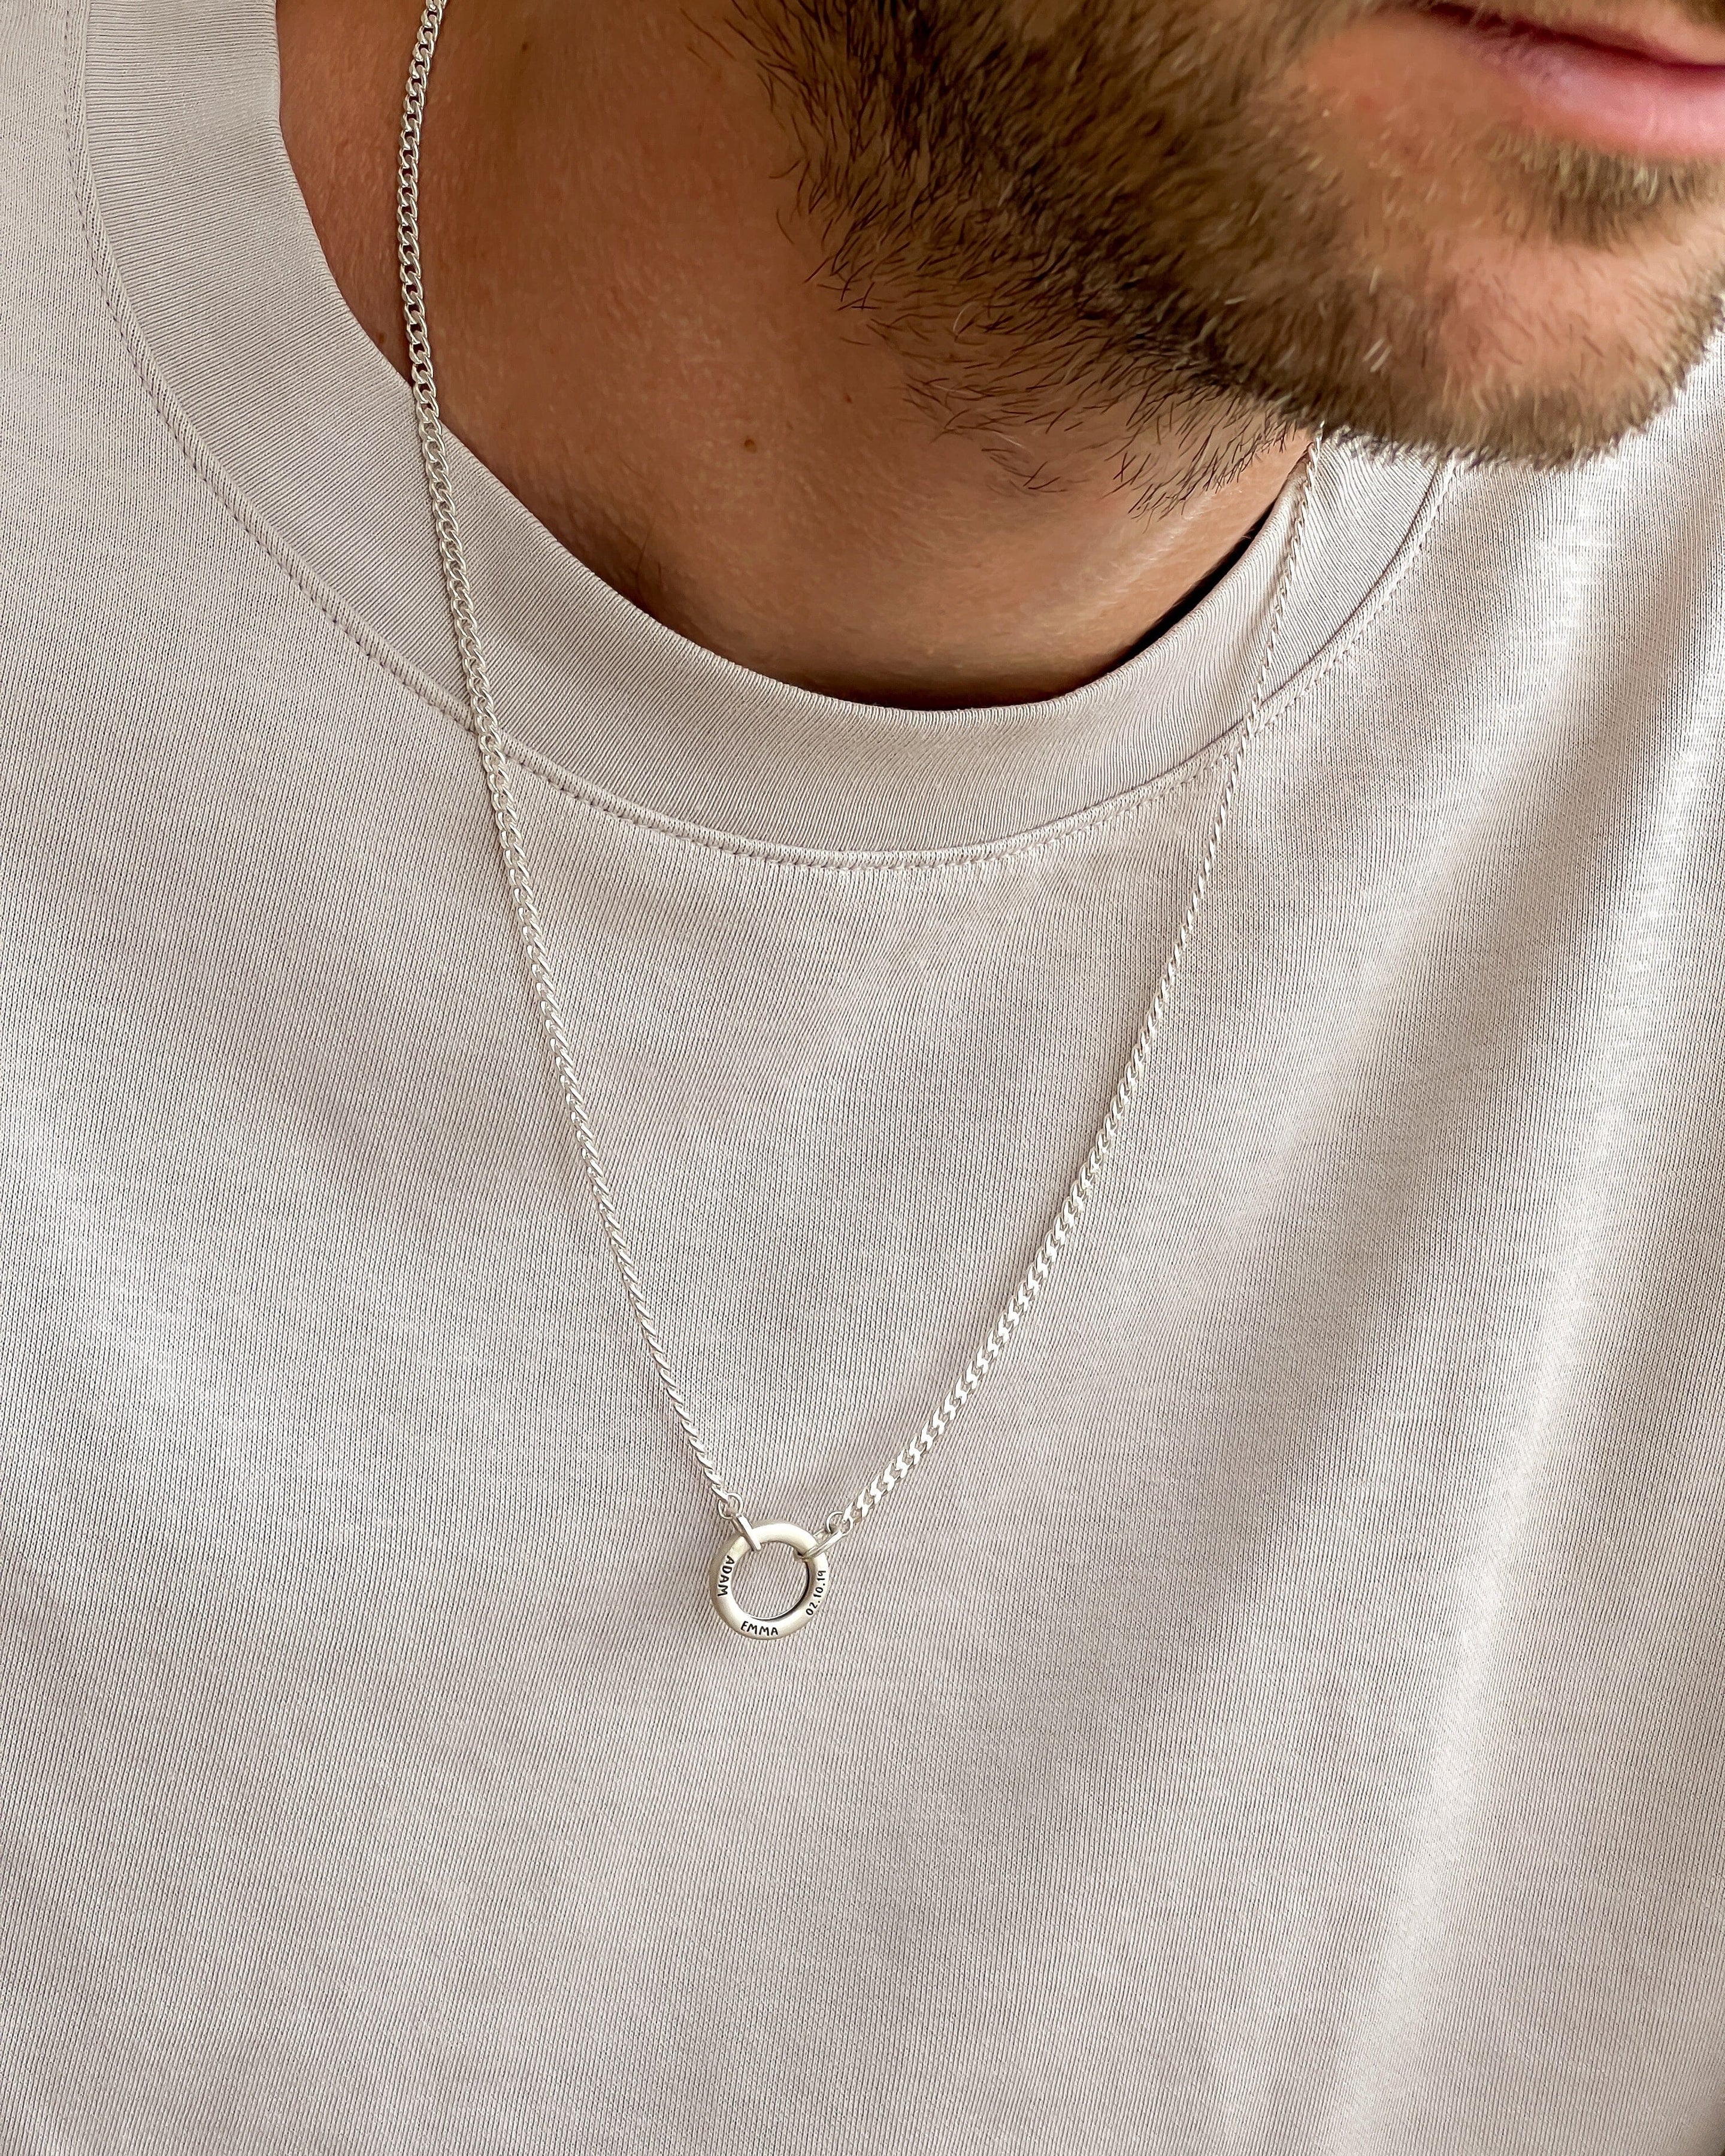 Men's Family Circle Necklace - 925 Sterling Silver Necklaces magal-dev 